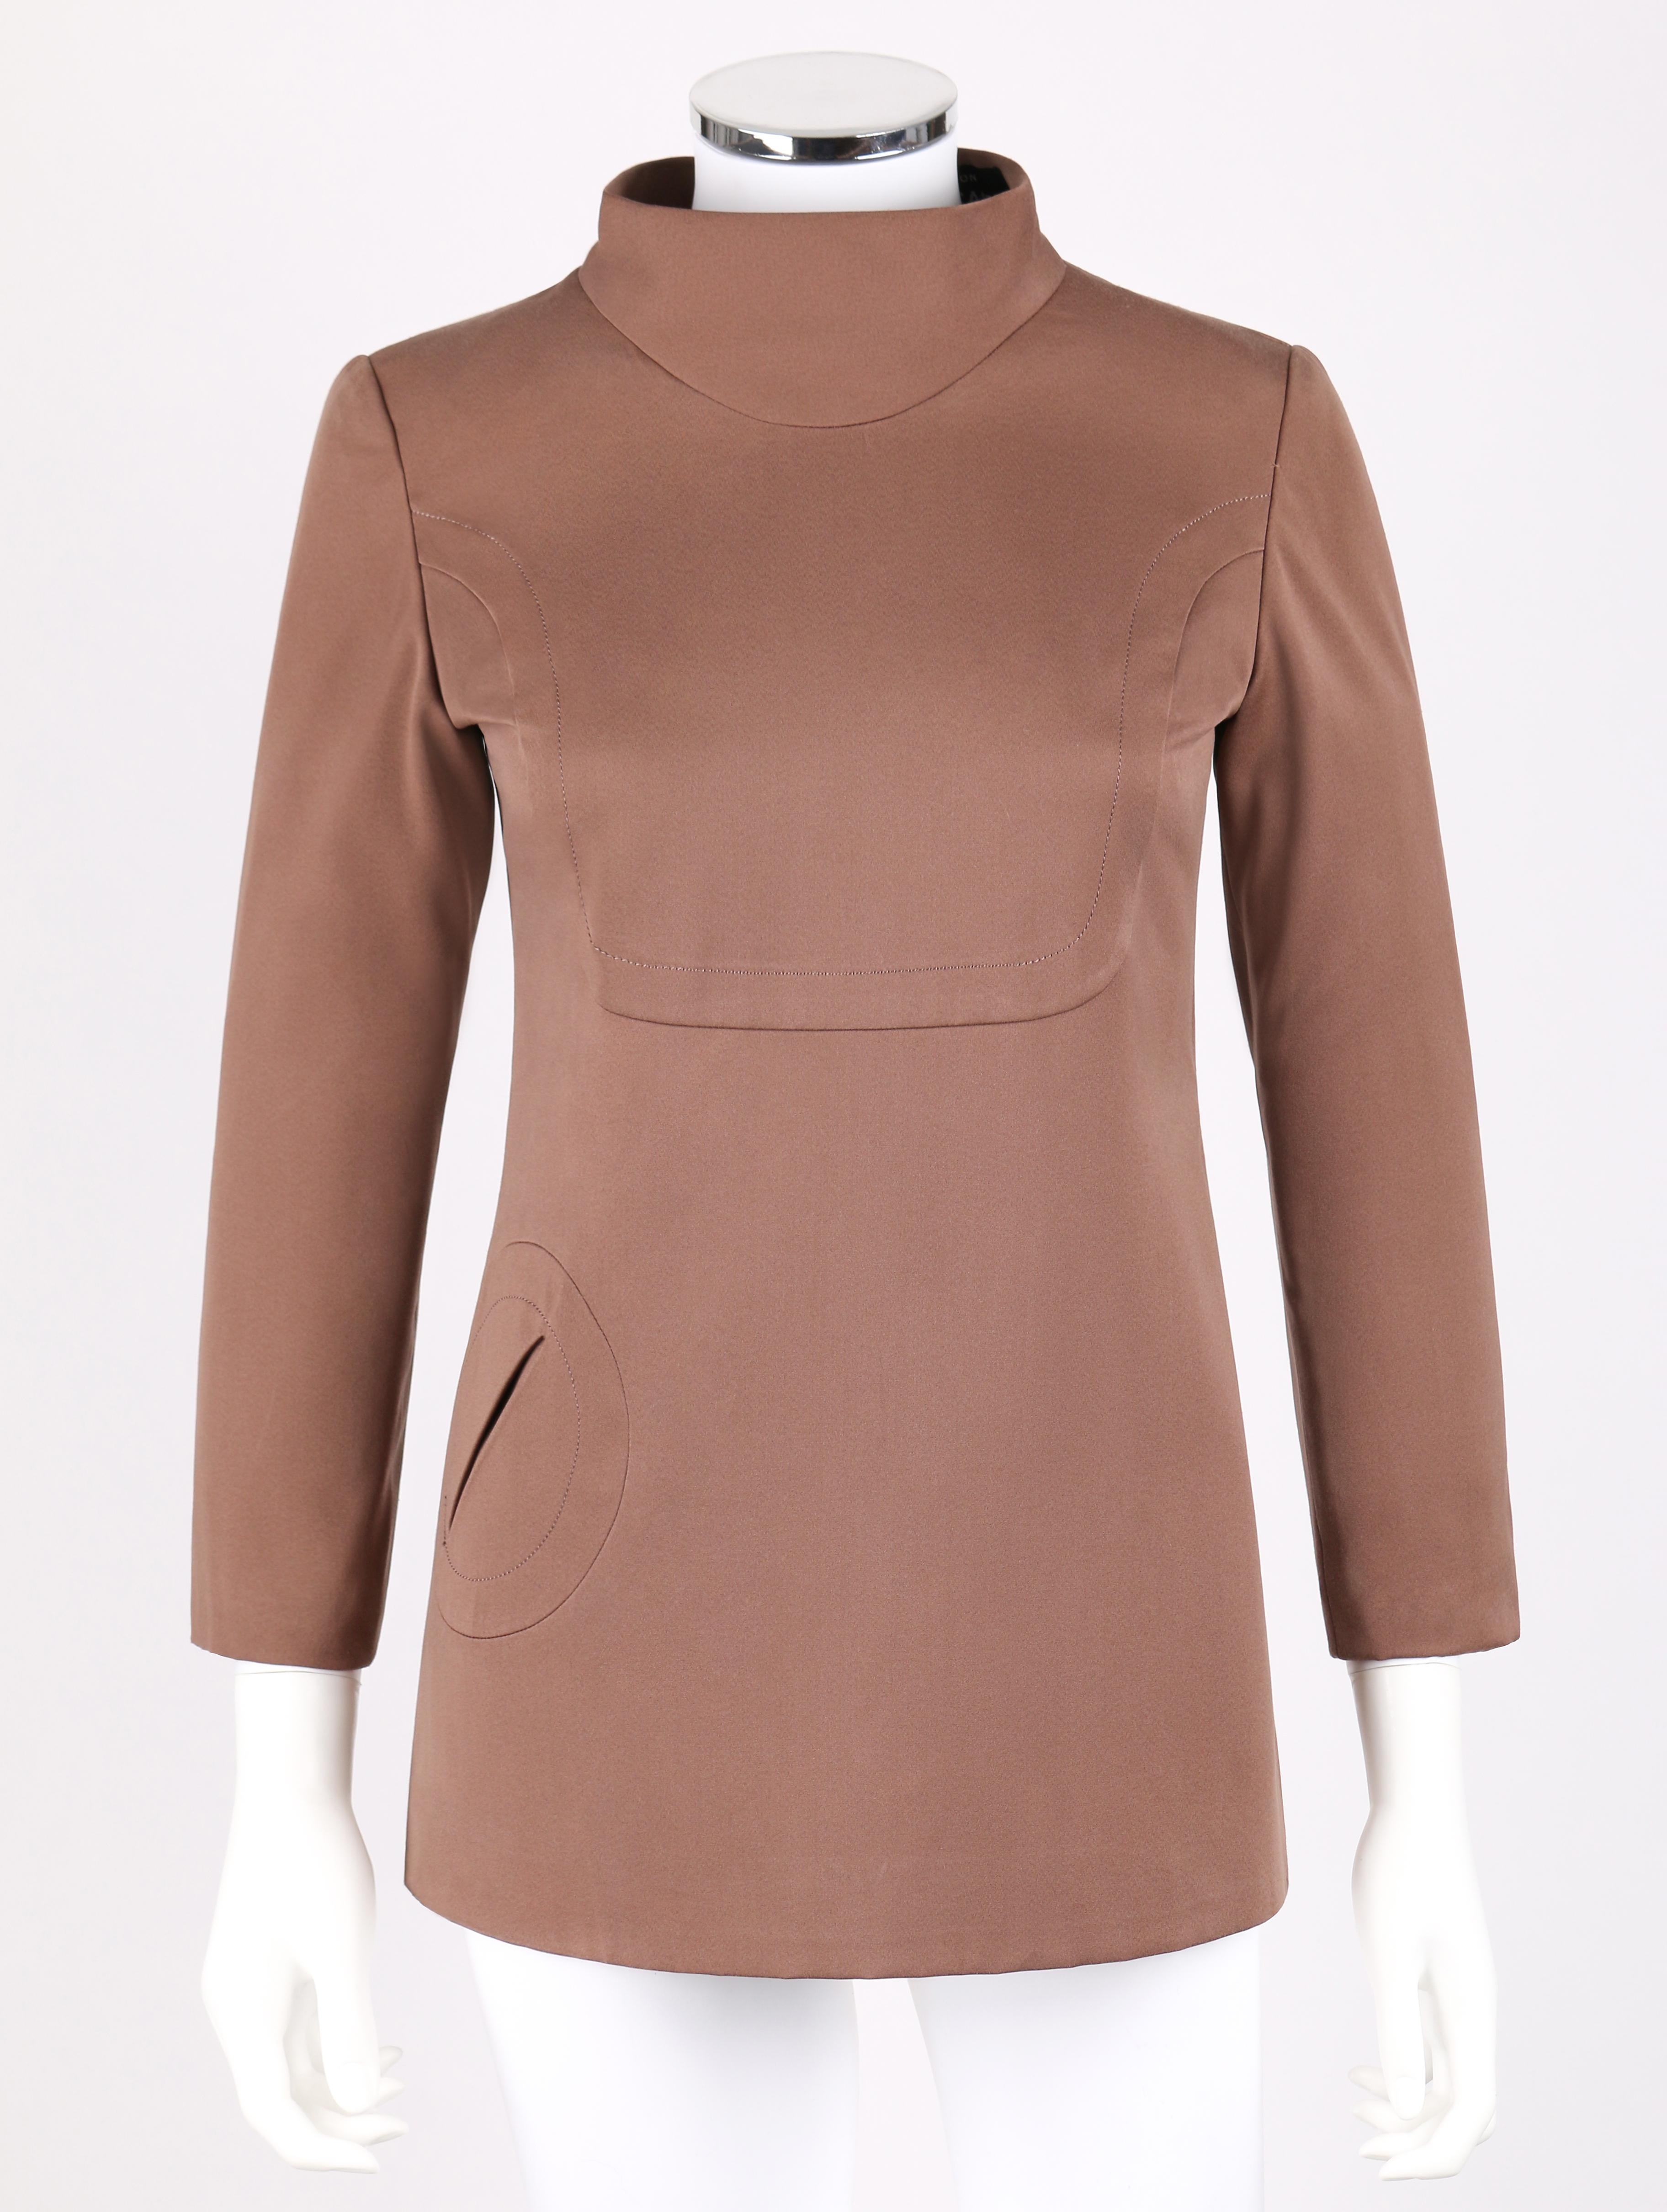 Vintage Pierre Cardin for Takashimaya c.1960's brown silk mod tunic. Top has signature circle shaped pocket at front. High standing collar. 3/4 length sleeves. Stylized u-shaped bust line. High slit at left side seam with rounded corners at hemline.